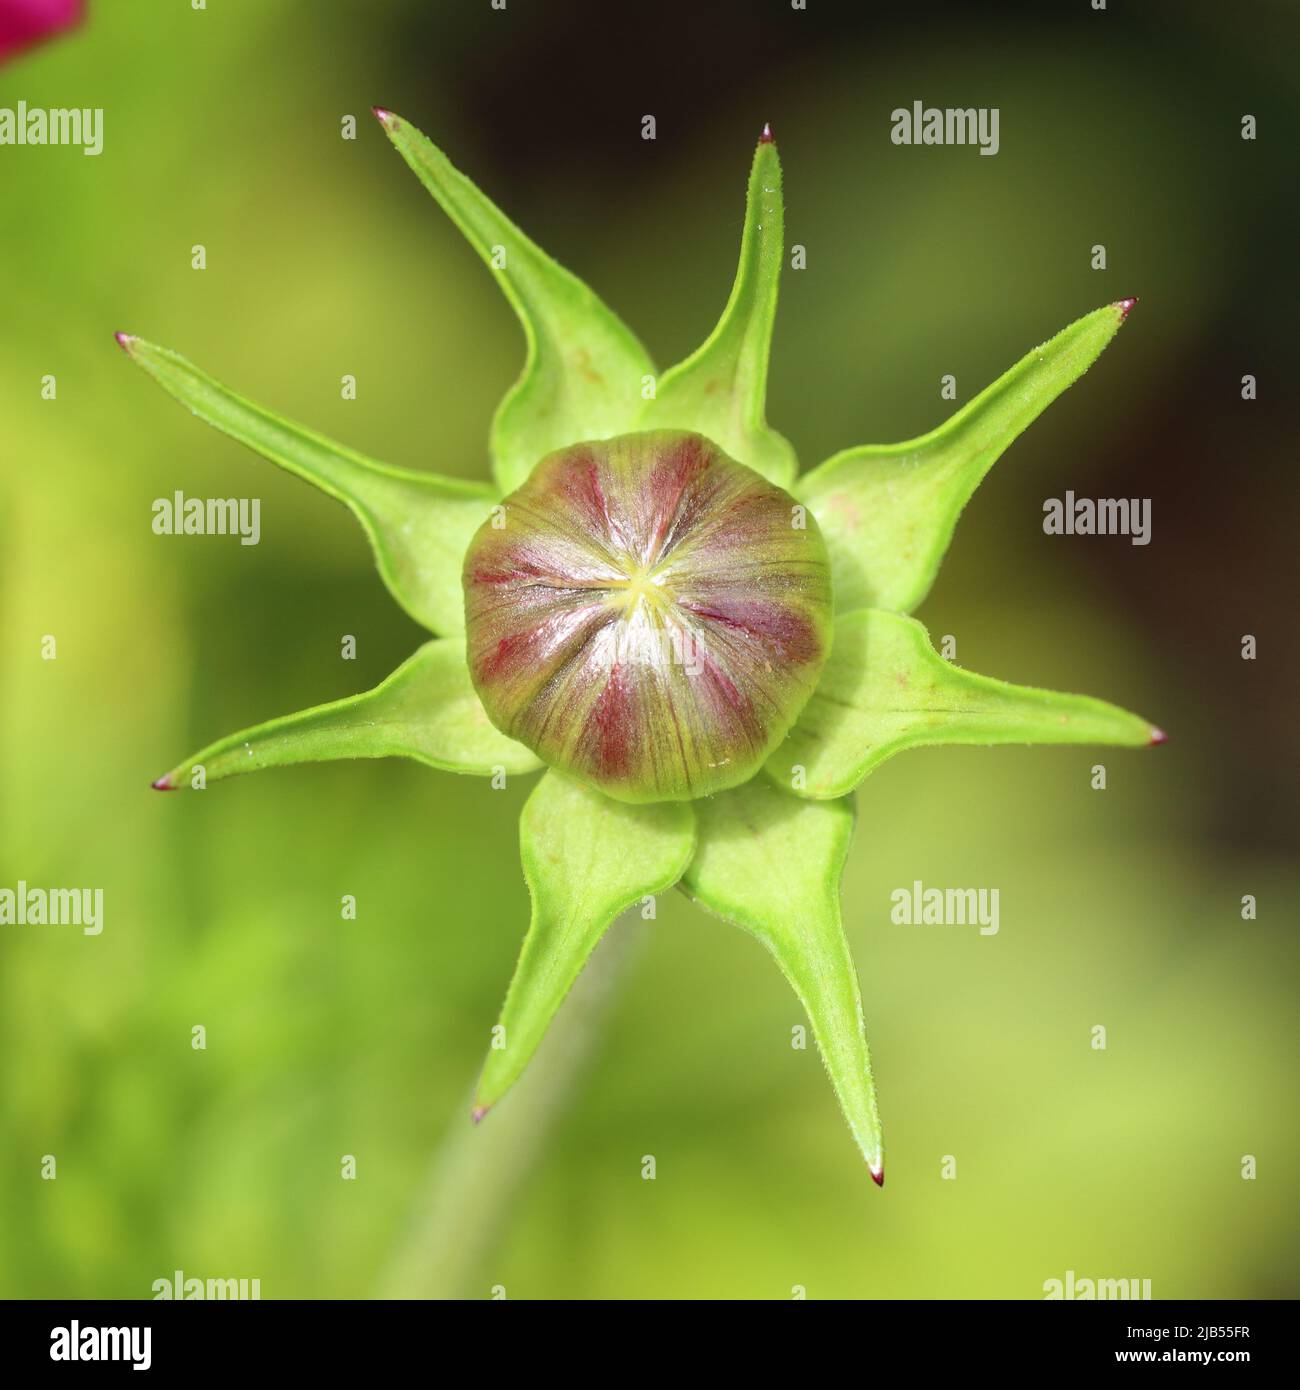 close-up of the beautiful star-shaped bud of a cosmos bipinnatus flower against a blurry green background Stock Photo